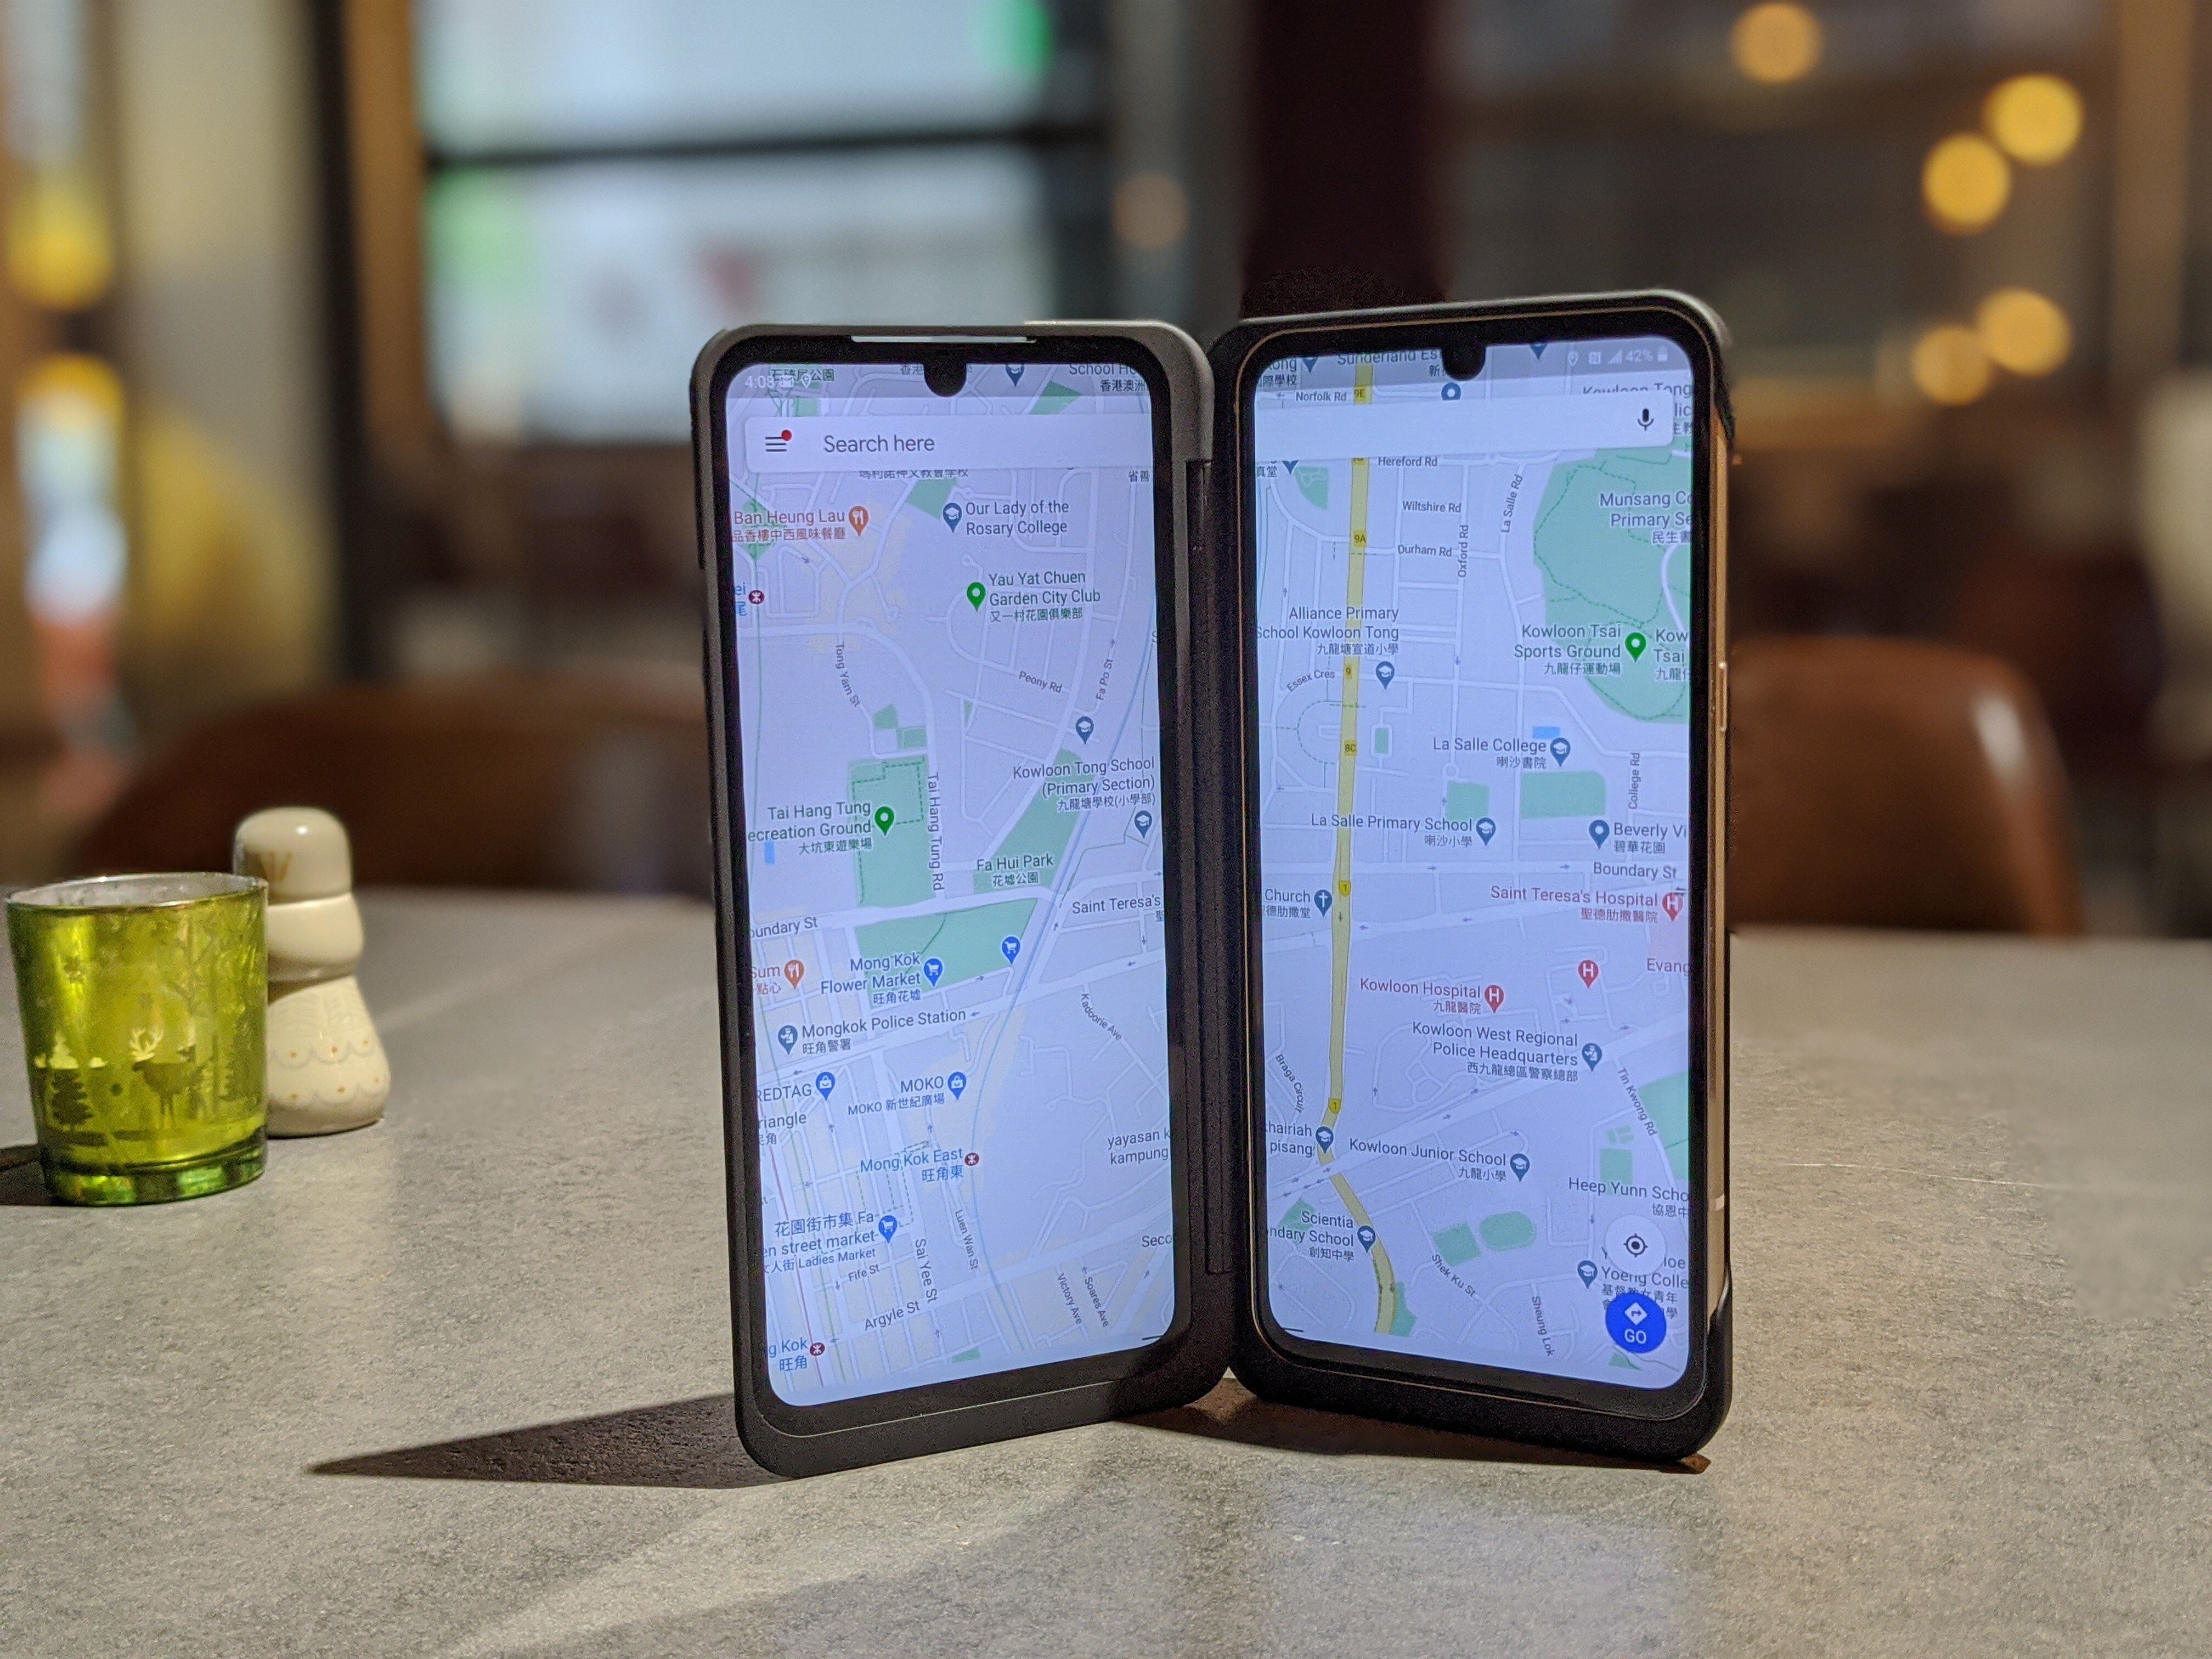 The Dual Screen accessory comes packaged with the phone in most markets. It connects to the V60 and turns it into a two-screen device. Users can run some apps across both screens, or two apps side by side. Photo: Ben Sin